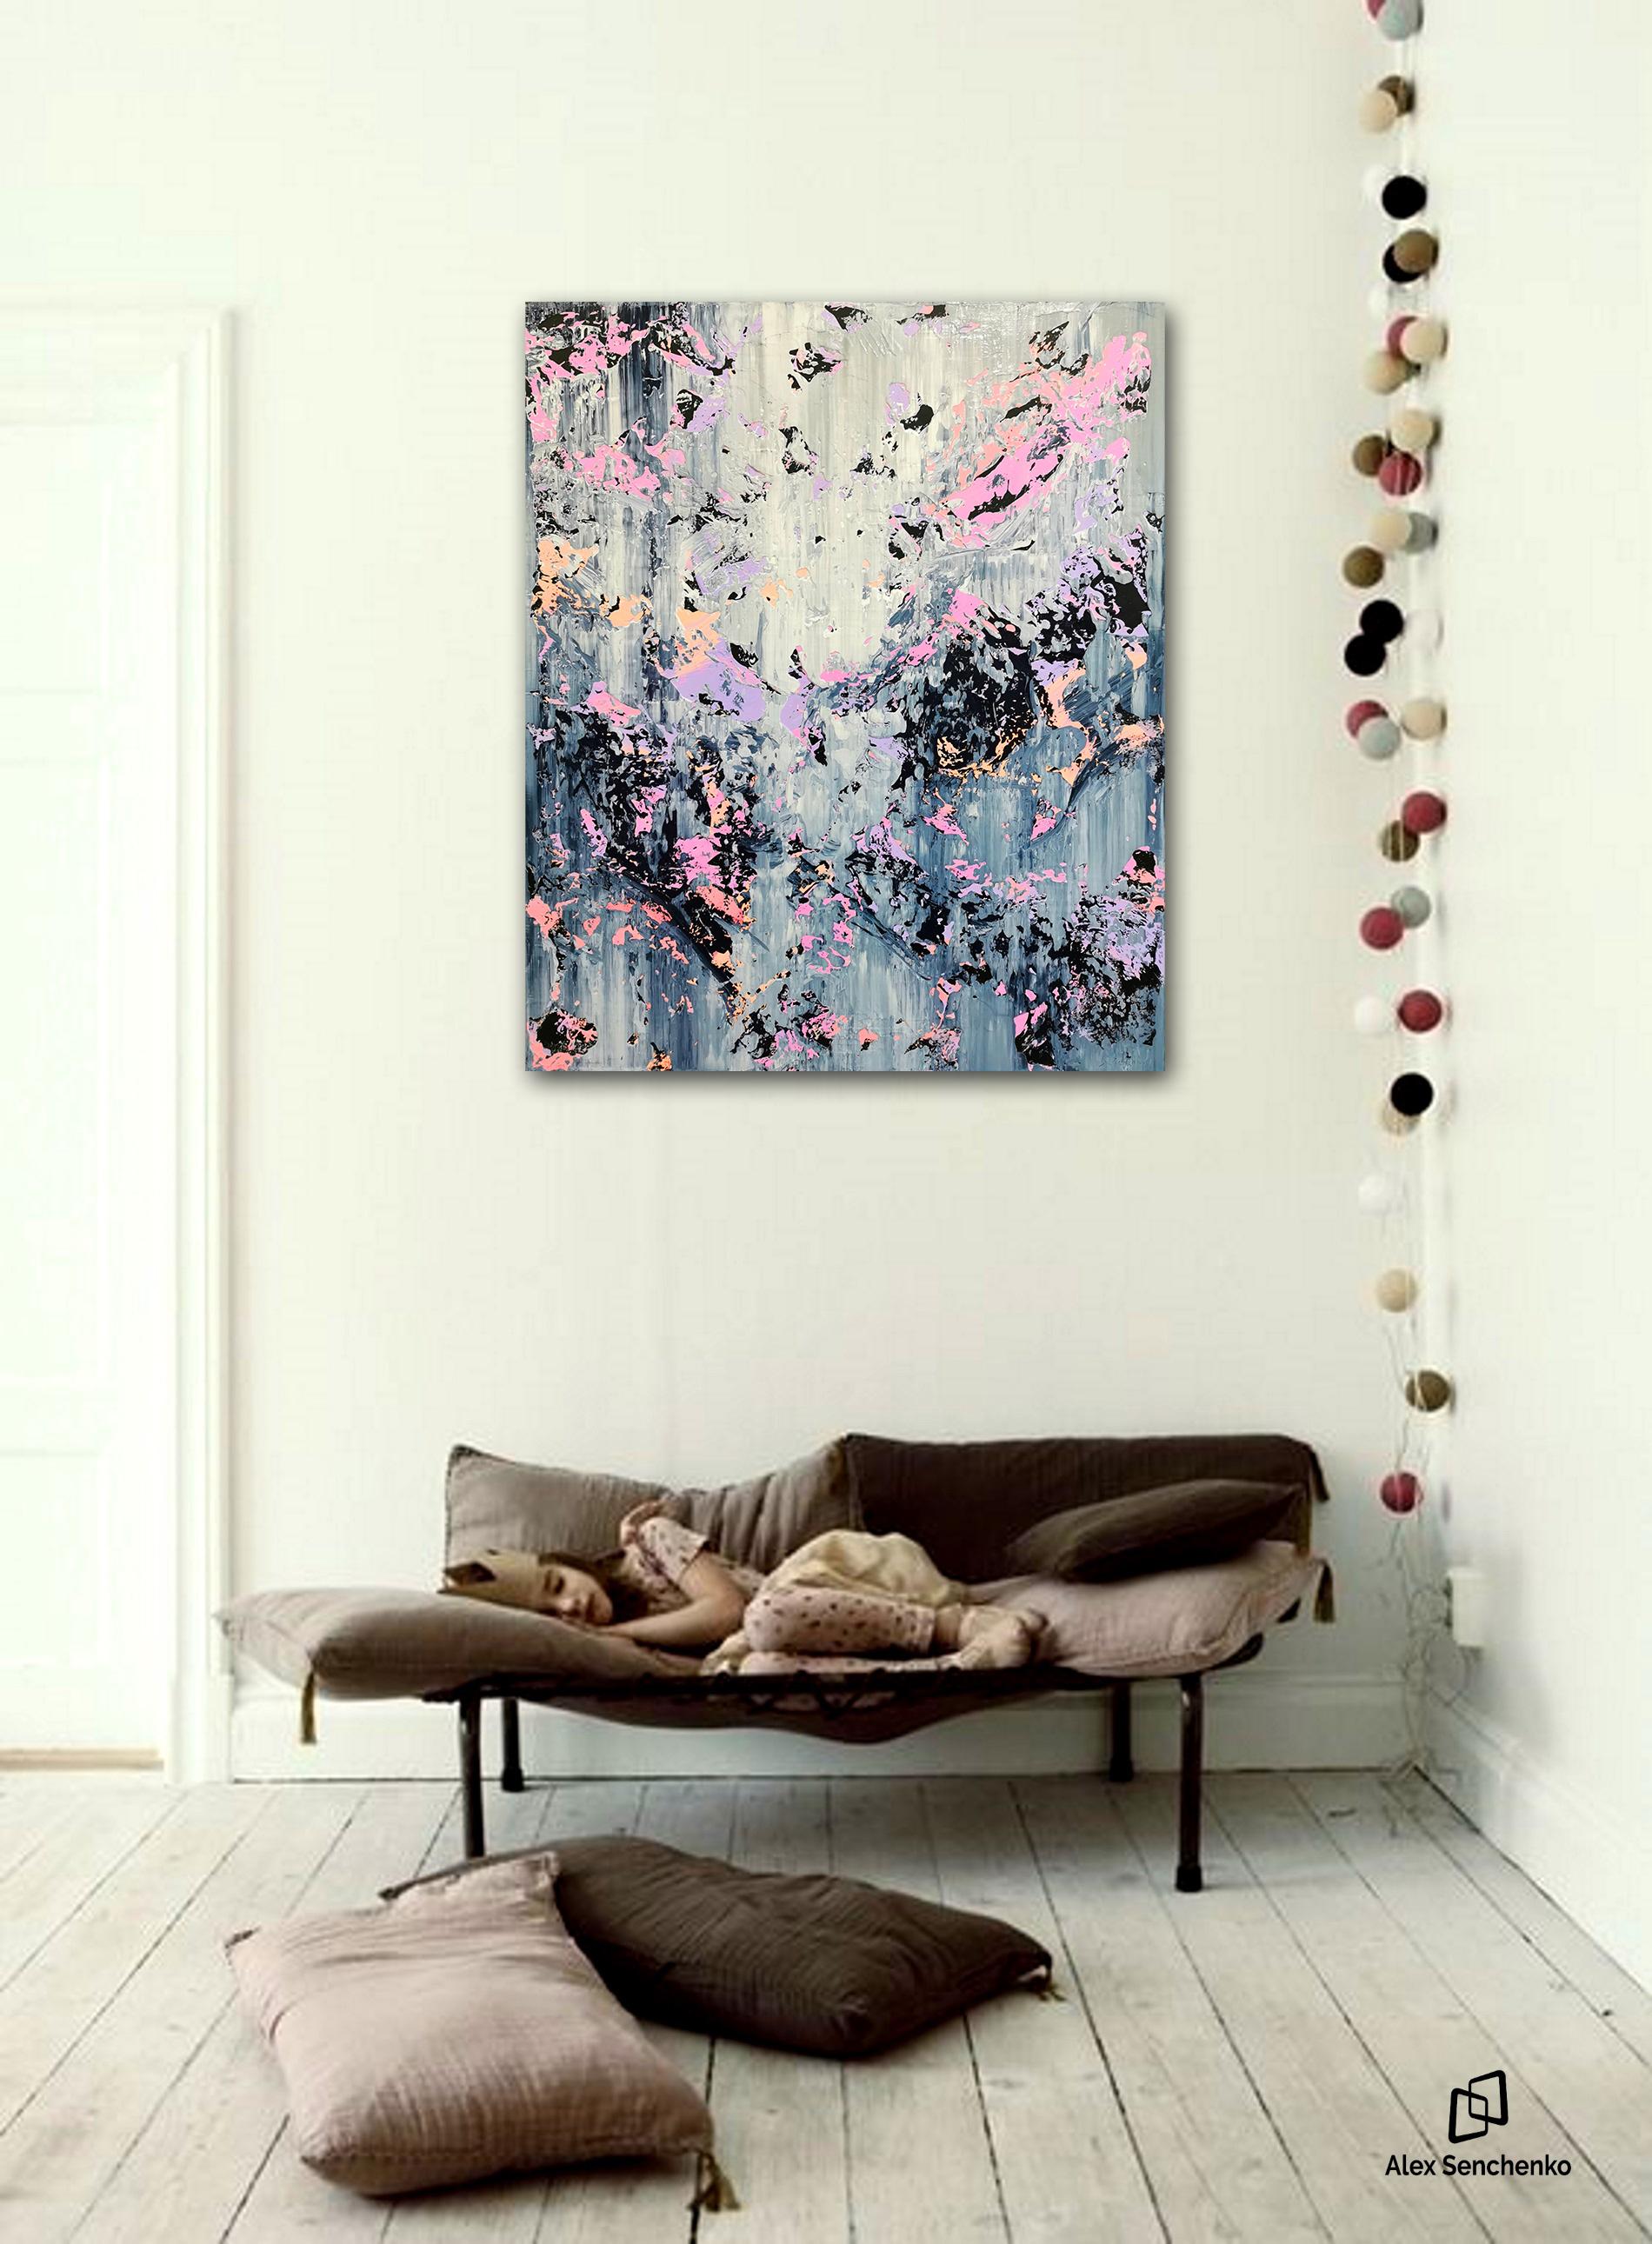 There’s something different about the homes of creative people. They like to surround themselves with inspiring things, from unique tablecloths to the incredible paintings on the walls.
Alex Senchenko’s - Abstract 2215 - can give your home that